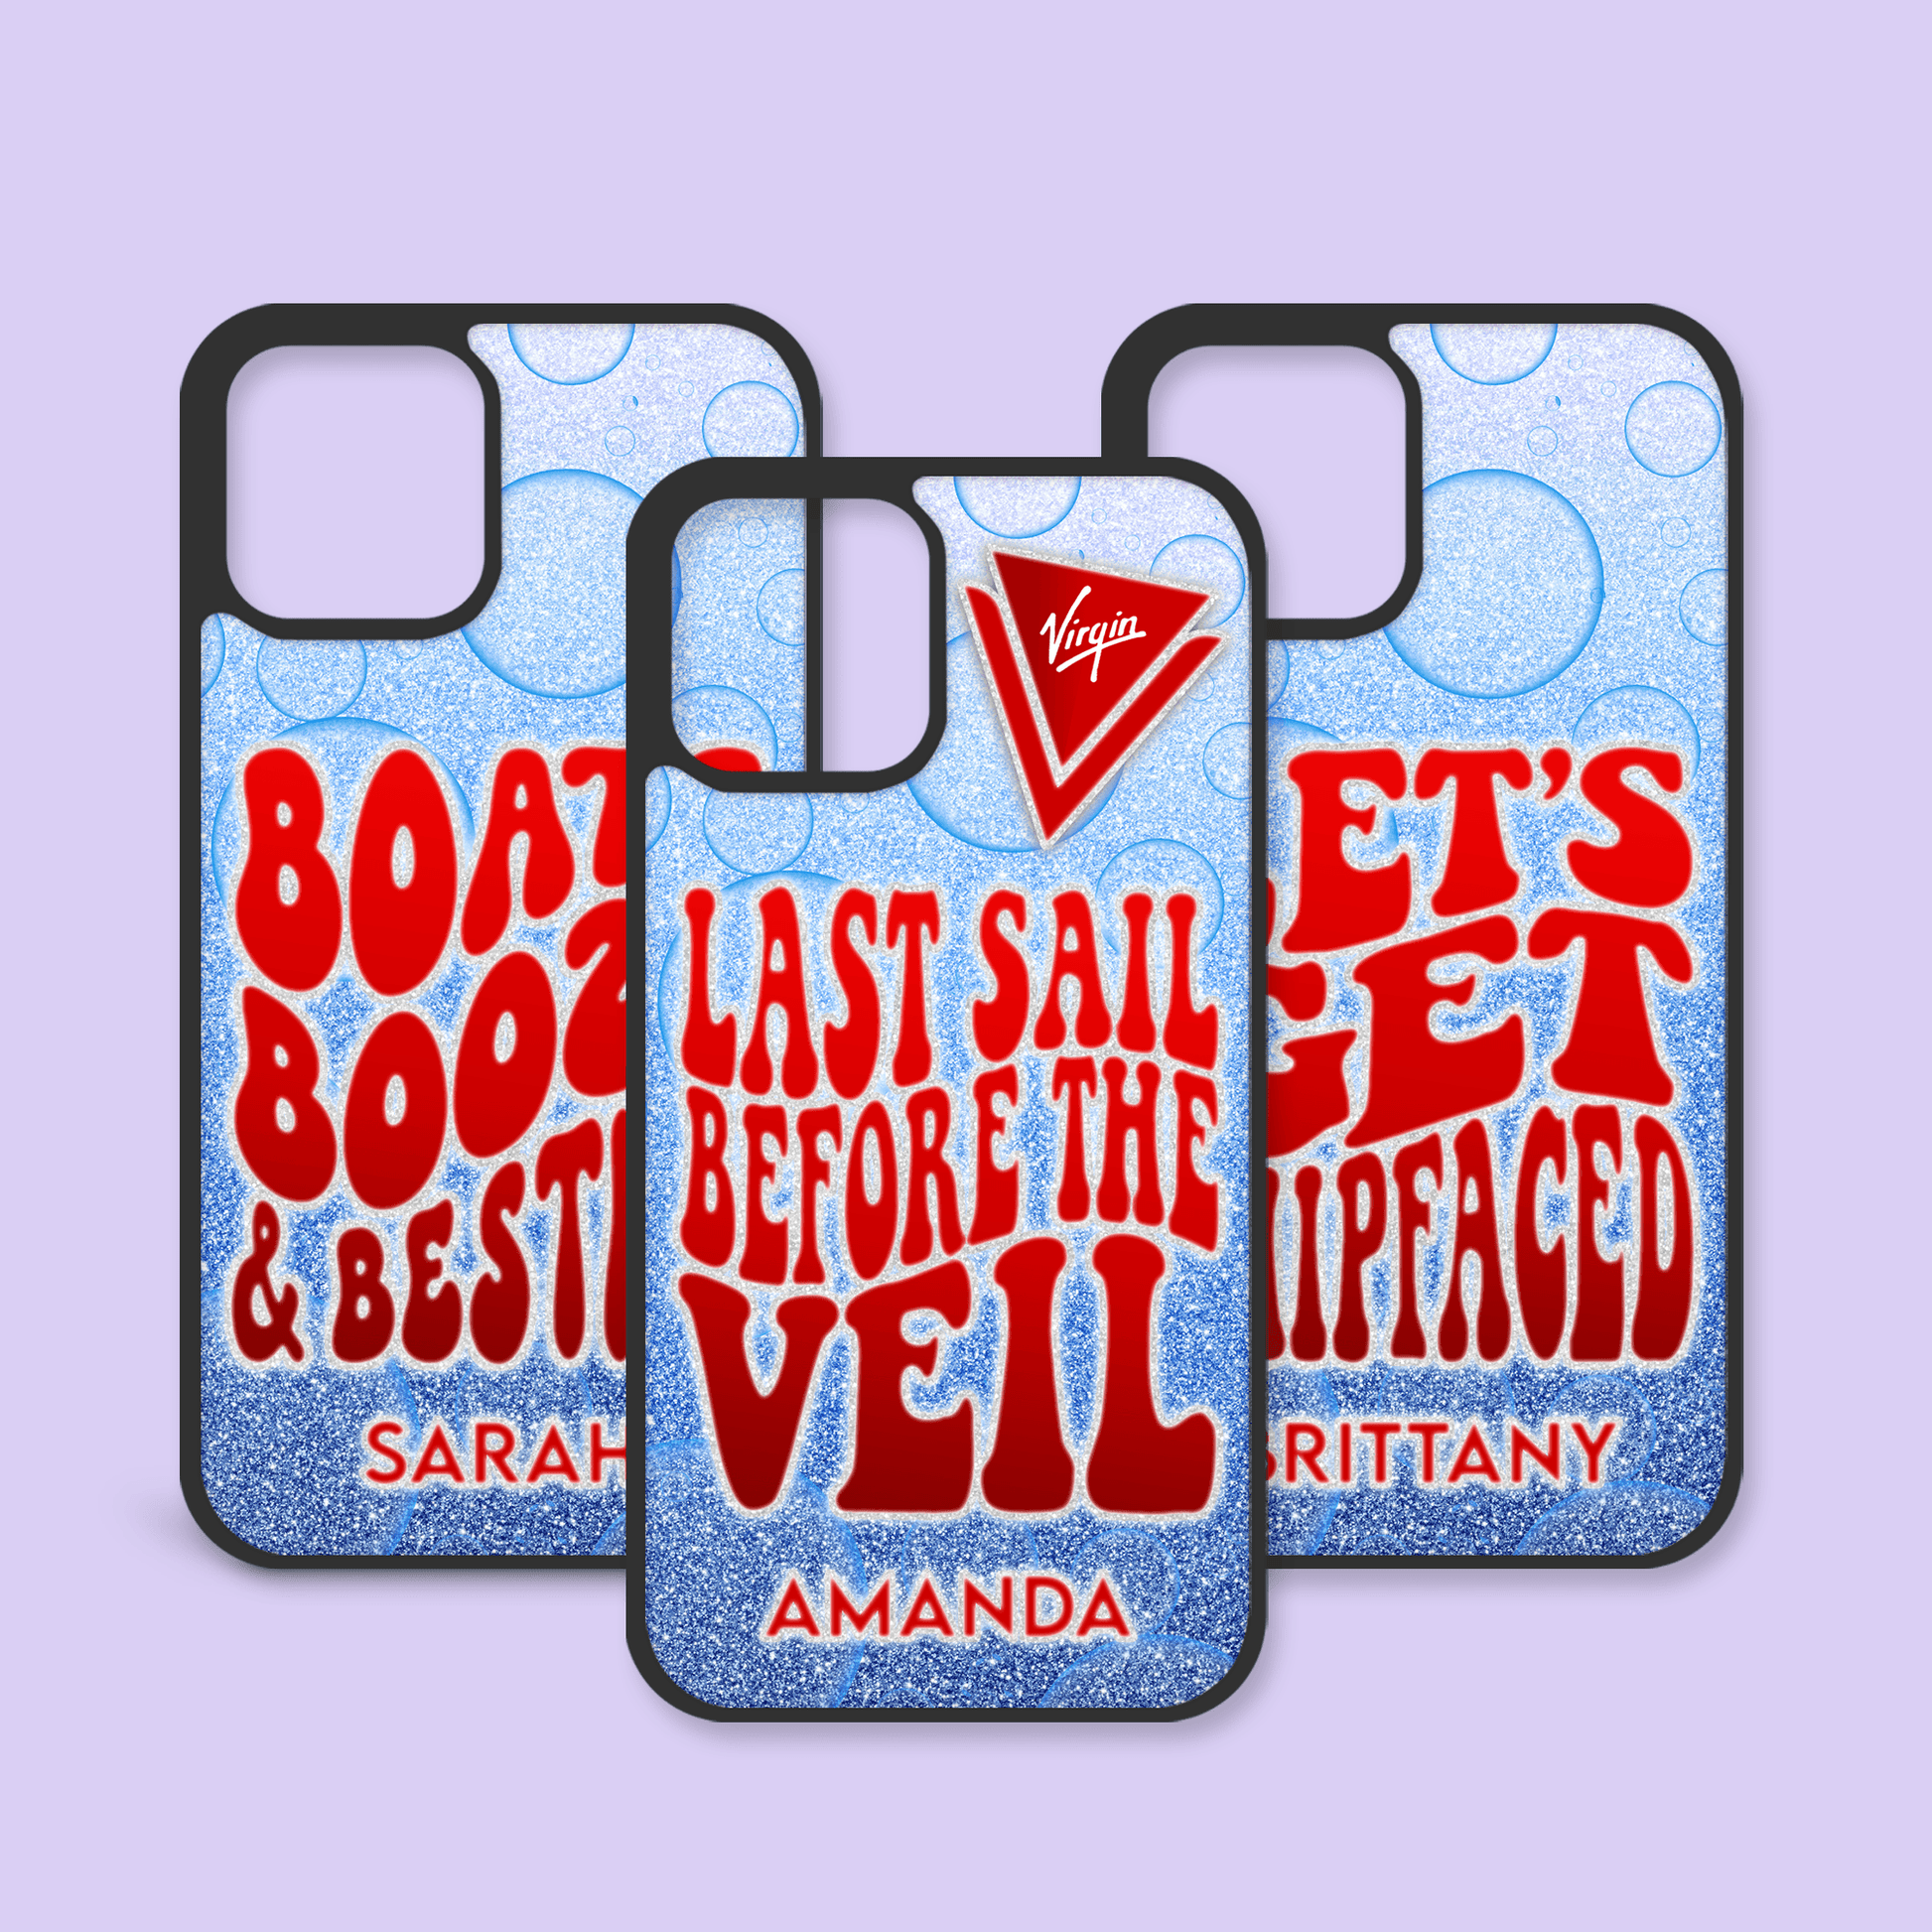 Virgin Voyages Bachelorette Personalized Phone Case - Boats, Booze & Besties - Two Crafty Gays